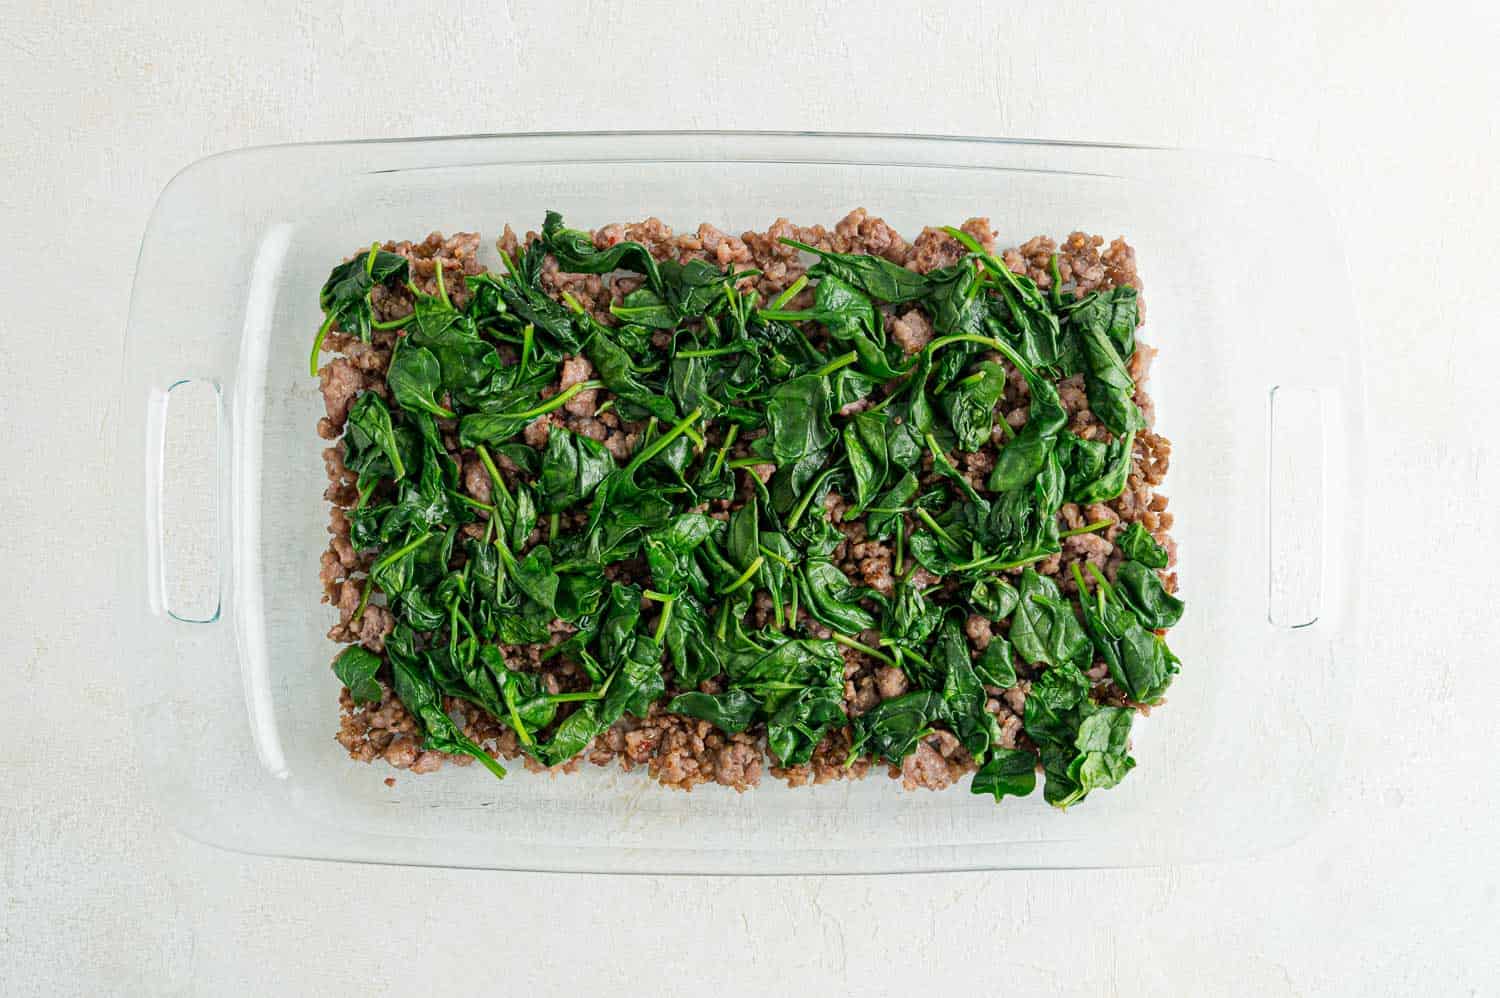 Spinach on top of ground sausage in a baking dish.